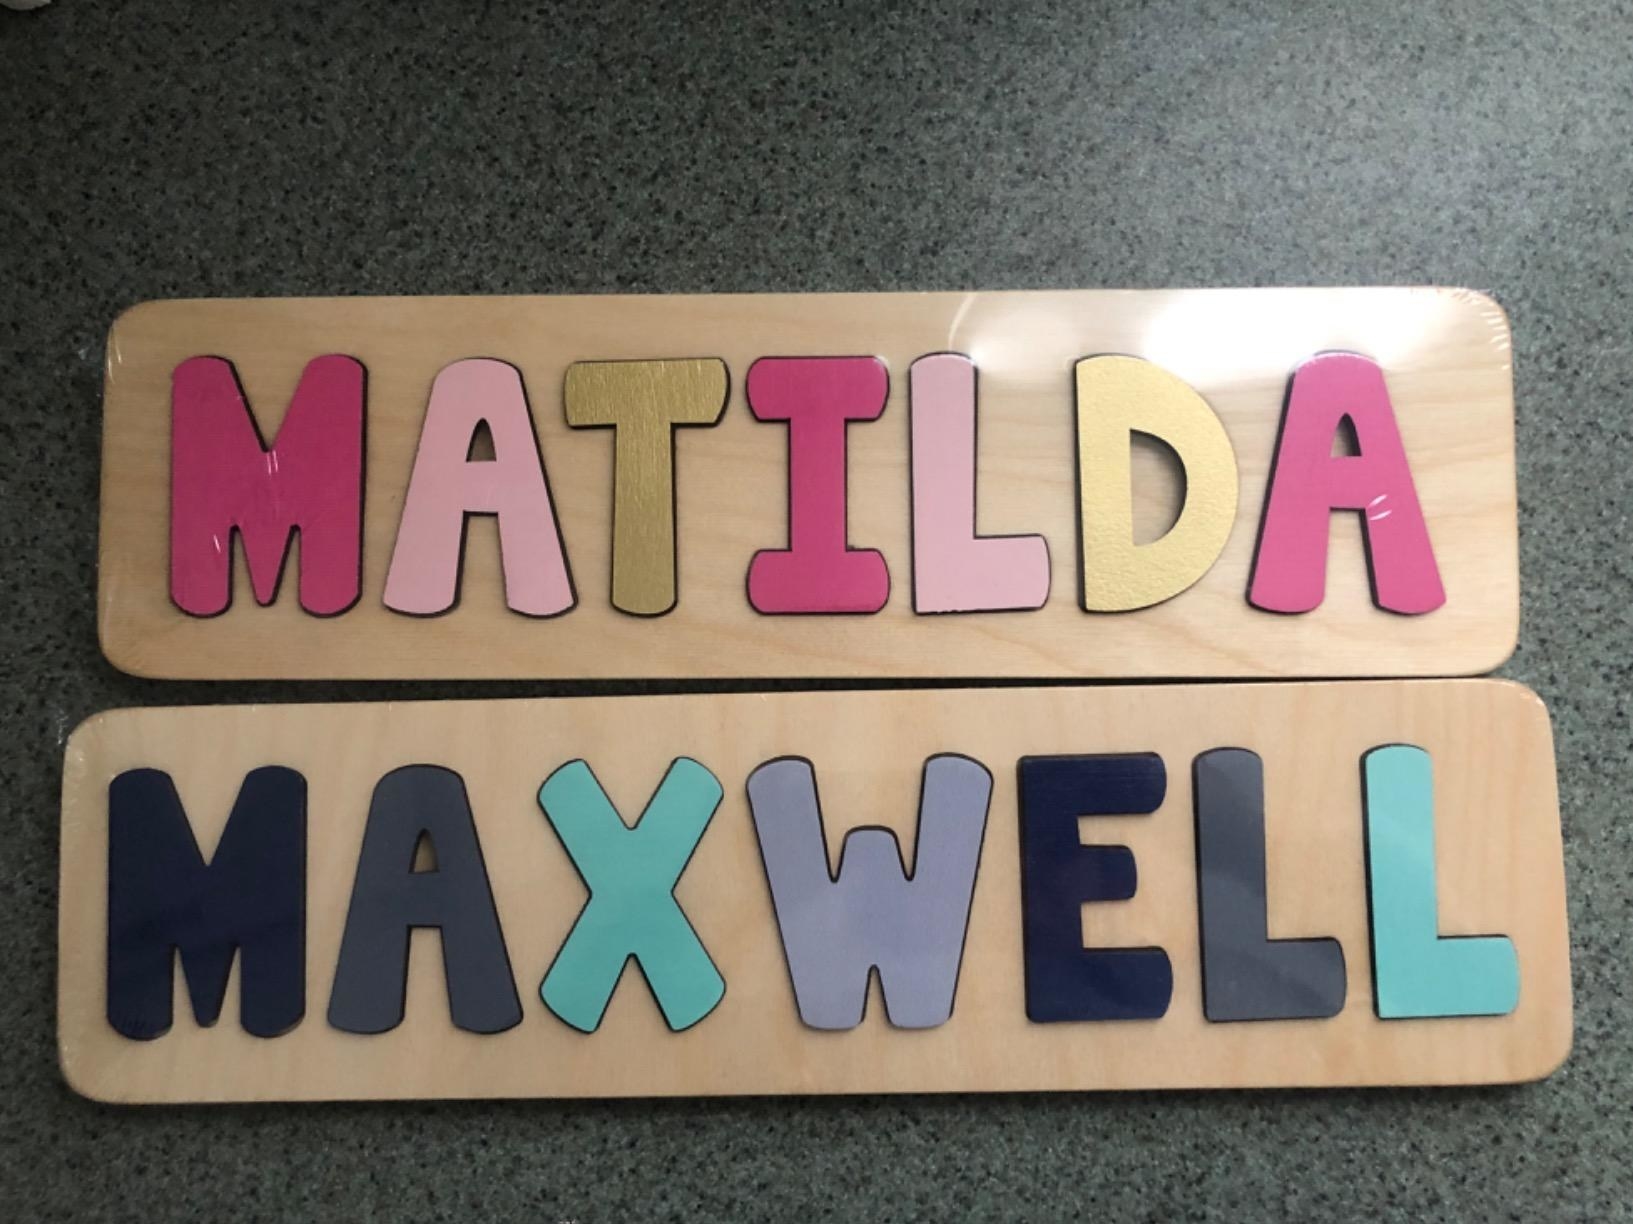 A reviewer showing letter-shaped puzzle pieces with the names Matilda and Maxwell